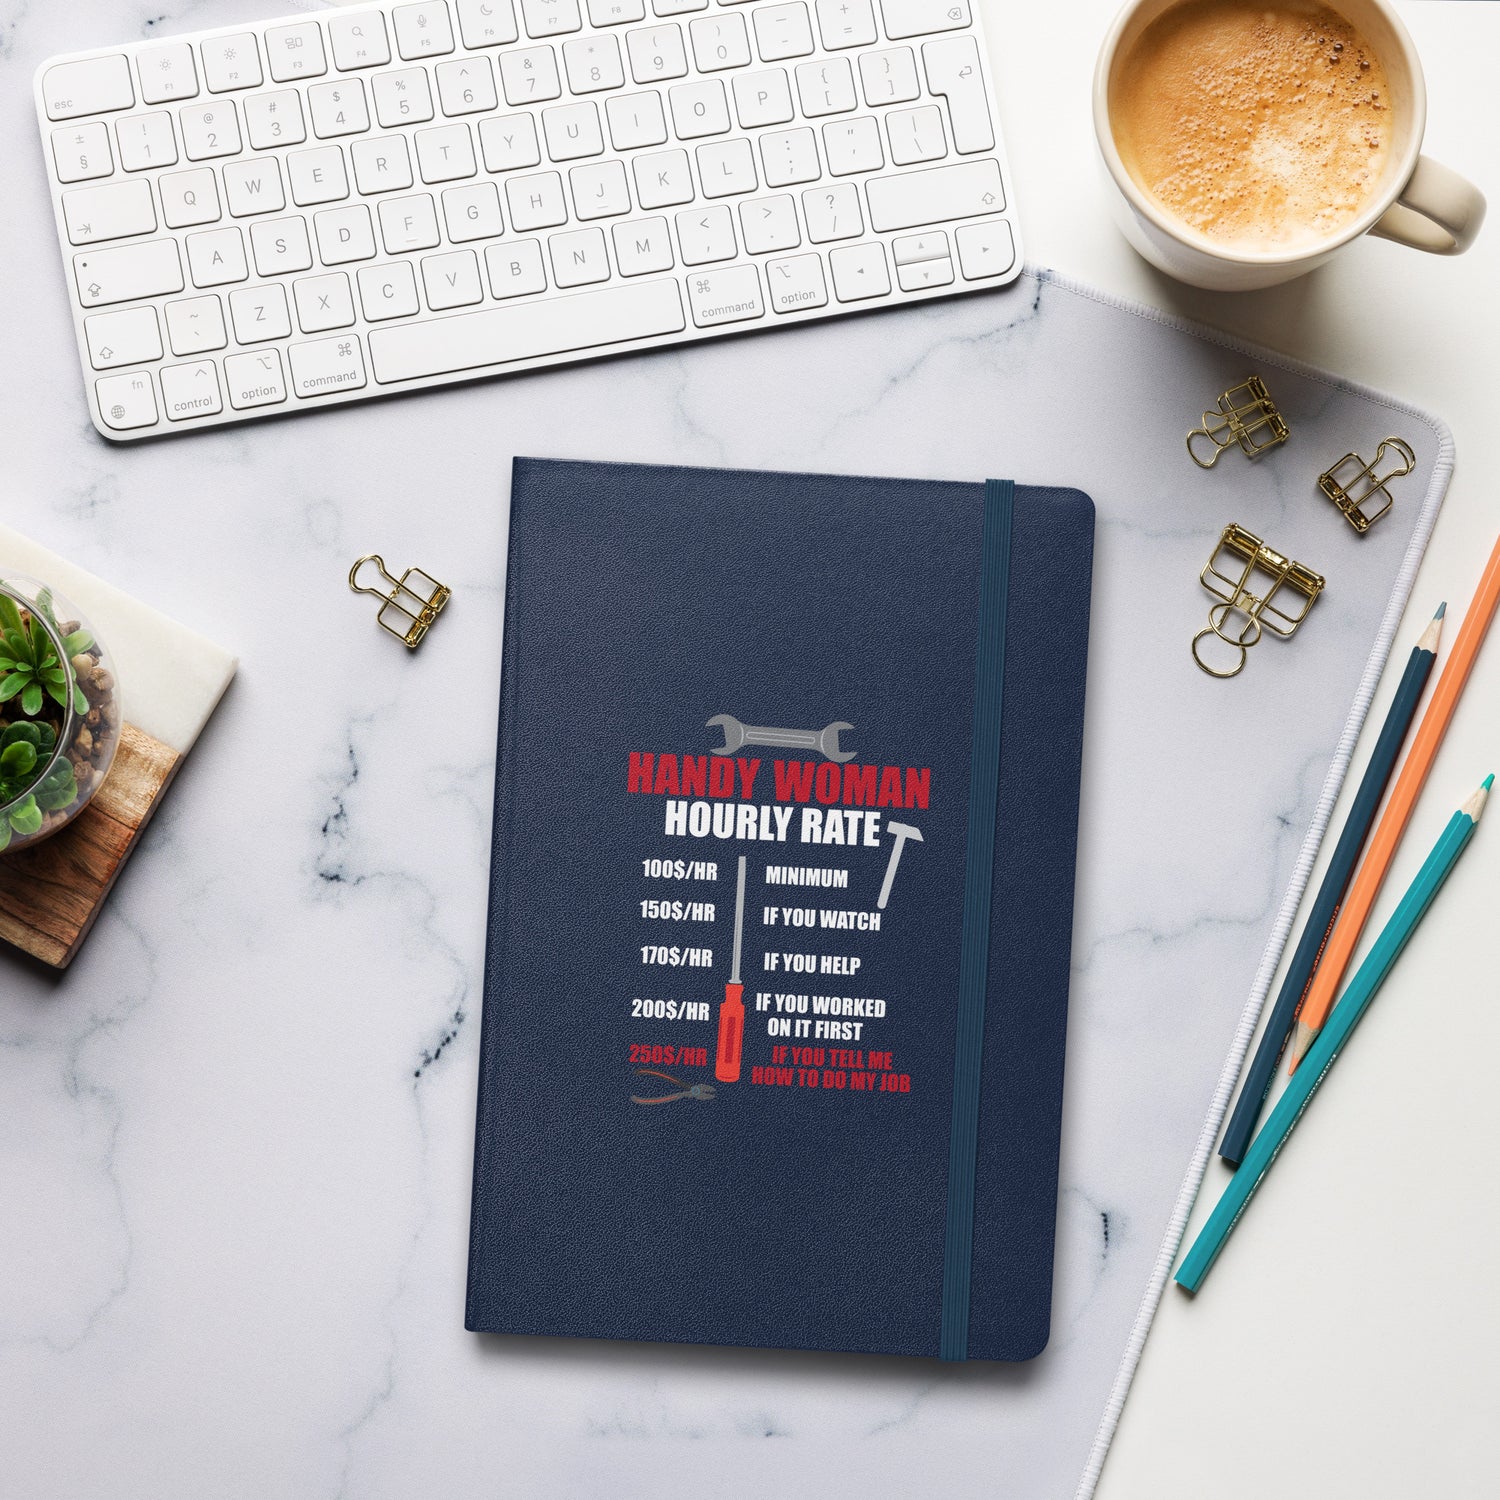 Hourly Rate Hardcover bound notebook